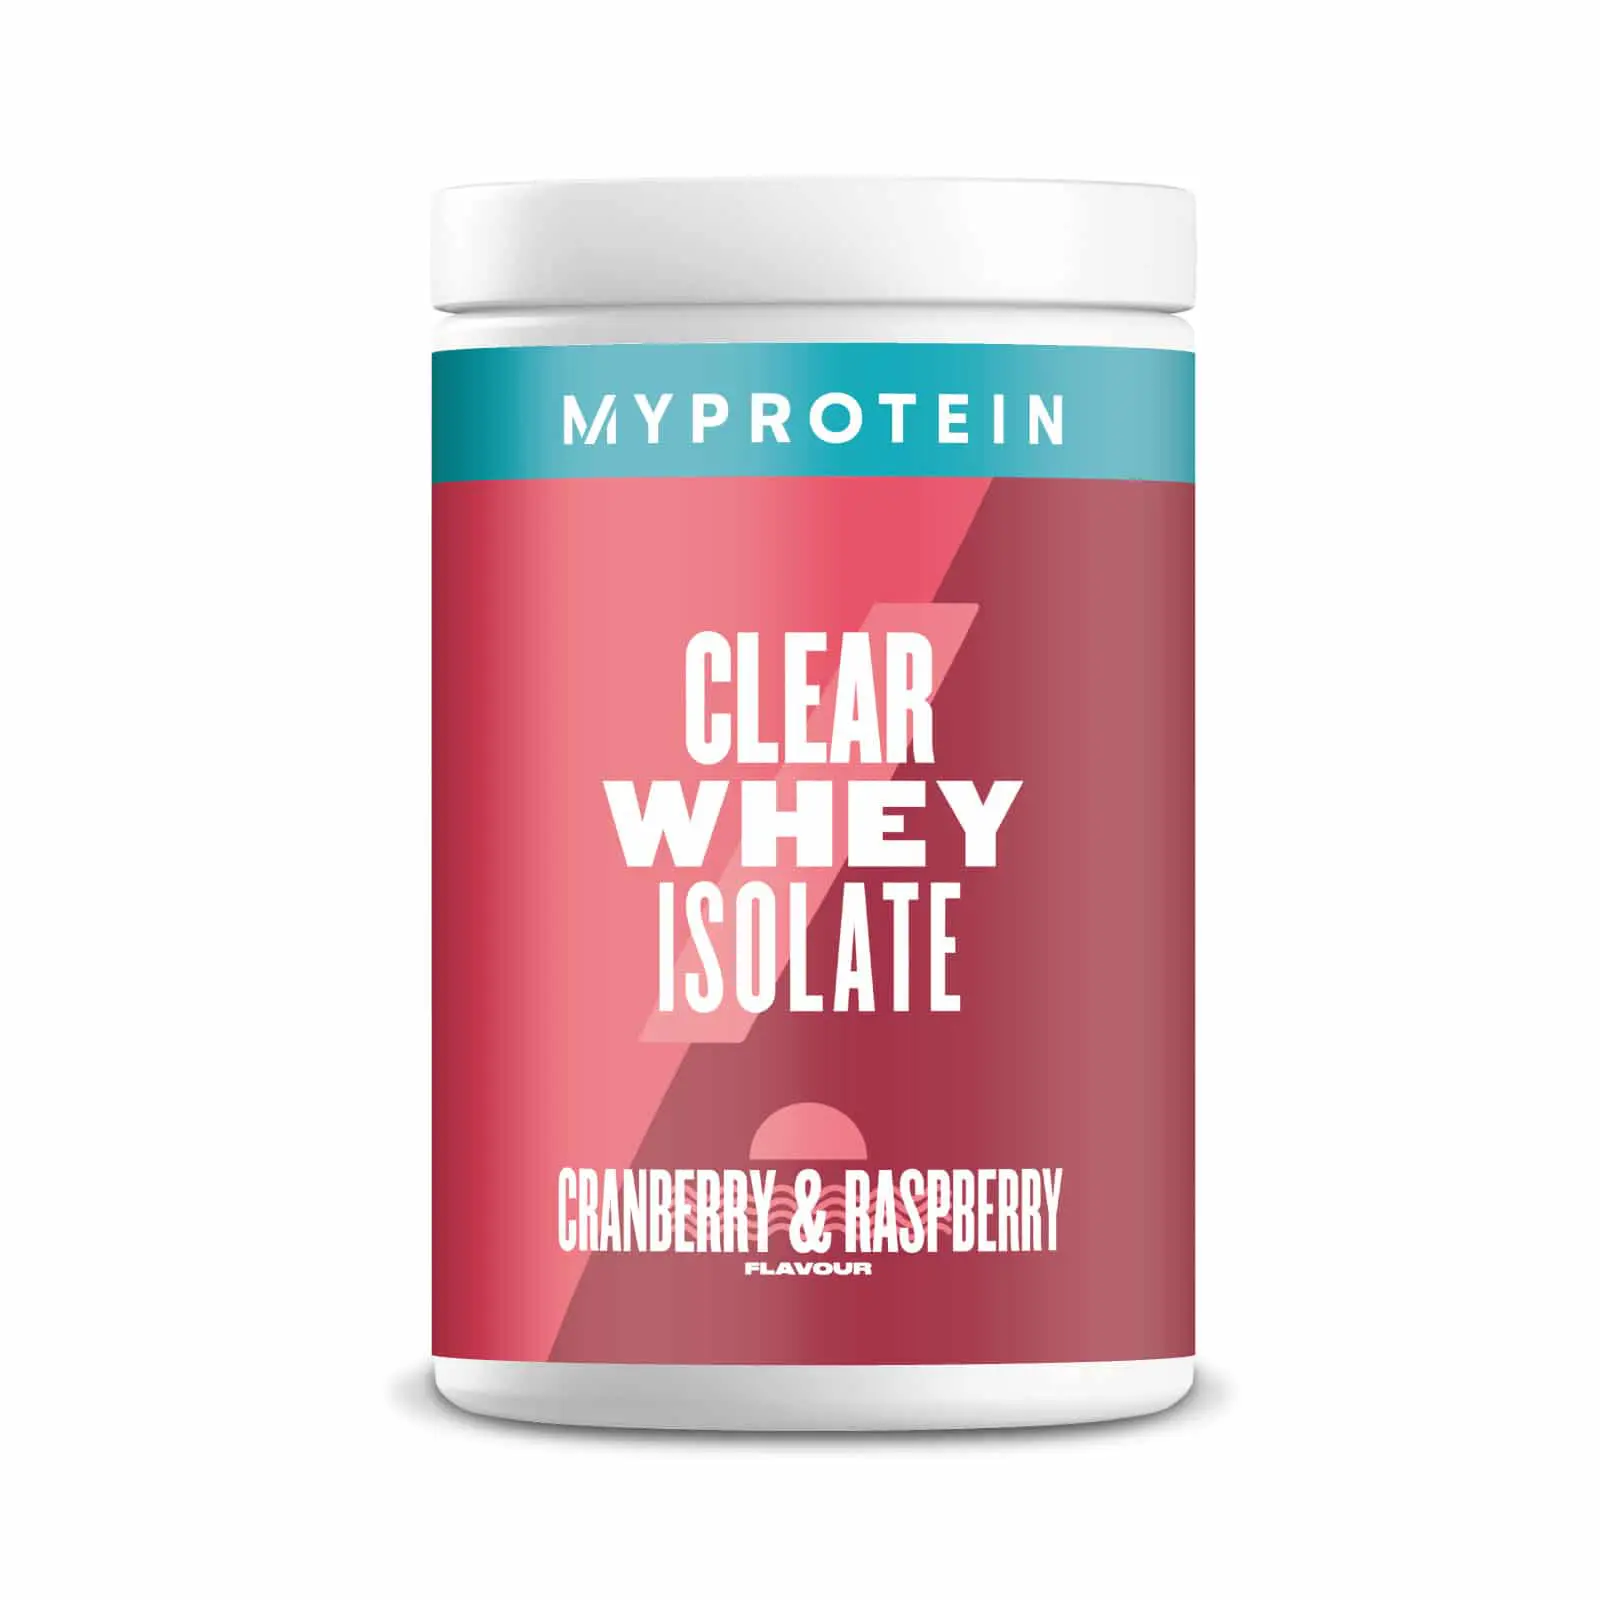 Myprotein reveal flavour extension in world-first clear whey